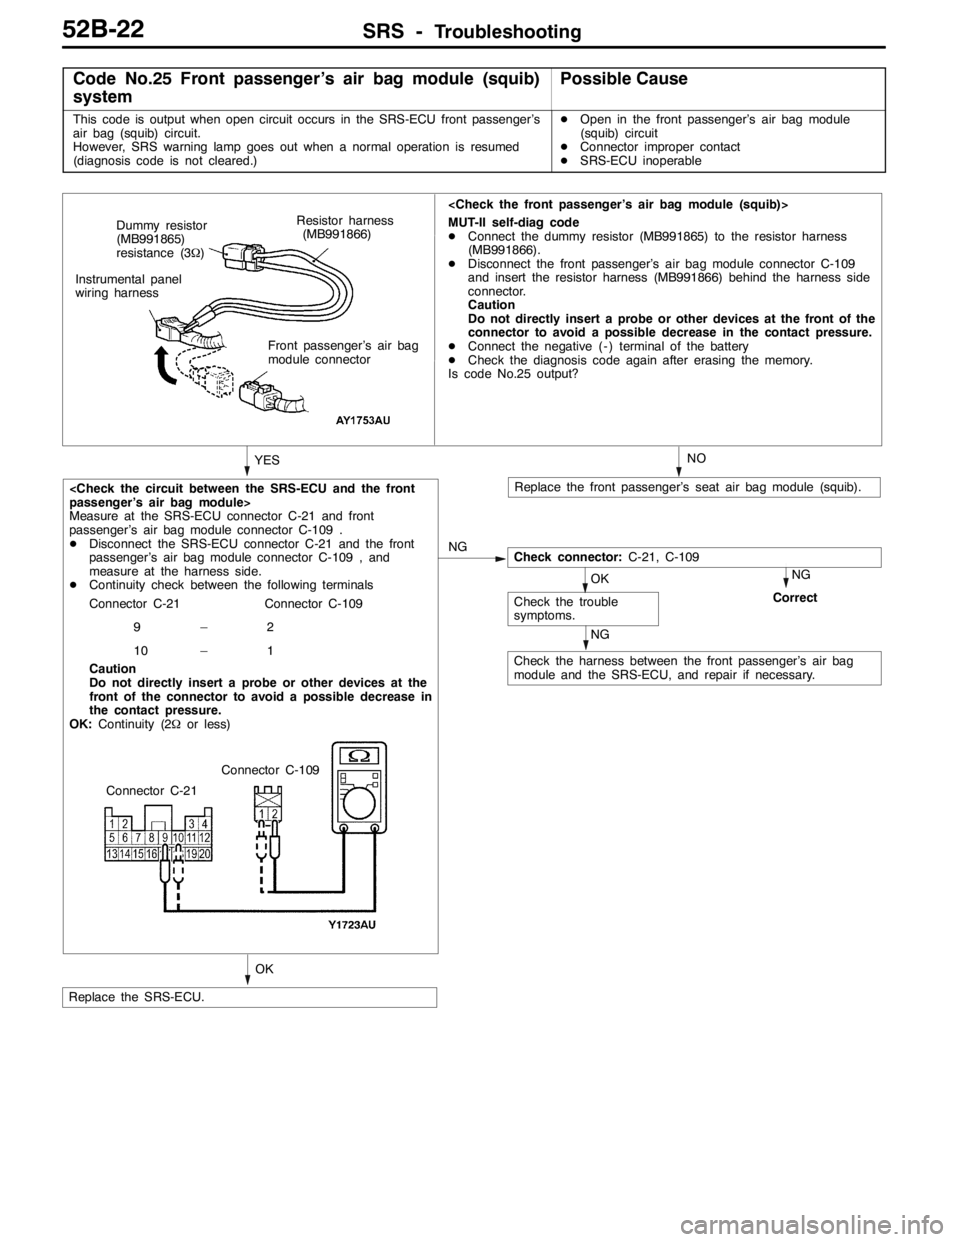 MITSUBISHI LANCER EVOLUTION 2007  Service Repair Manual SRS -Troubleshooting52B-22
Code No.25 Front passenger’s air bag module (squib)
systemPossible Cause
This code is output when open circuit occurs in the SRS-ECU front passenger’s
air bag (squib) ci